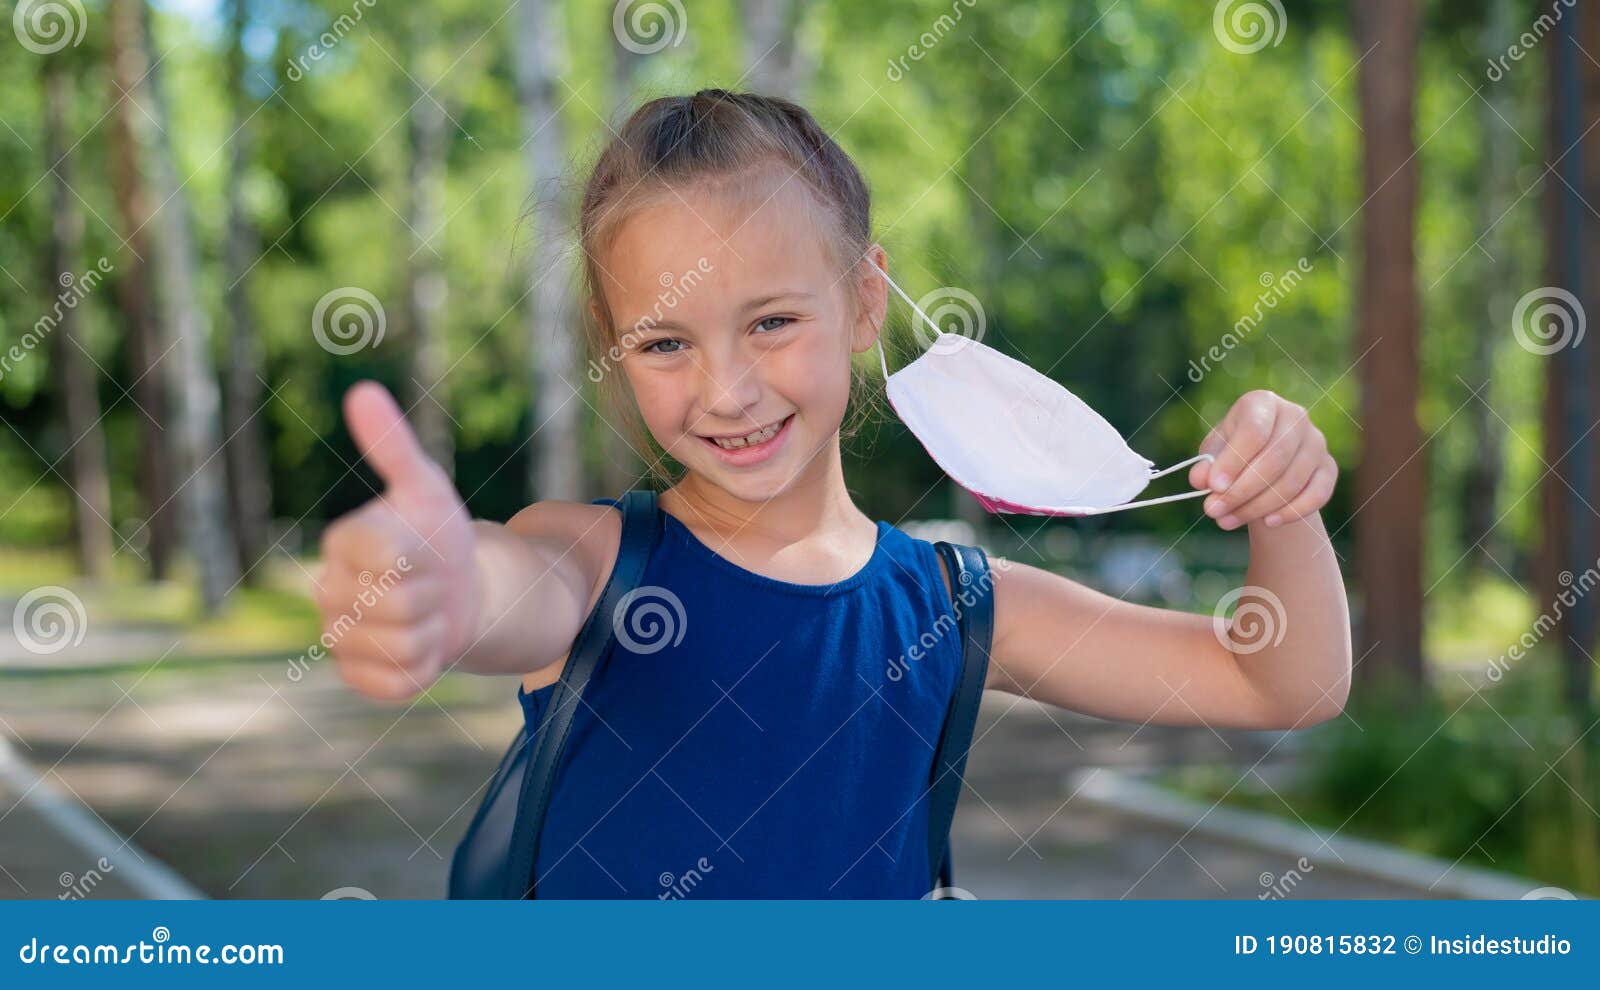 happy little girl takes off the mask and shows thumb outdoors. joyful smiling schoolgirl with a backpack pushes the mask